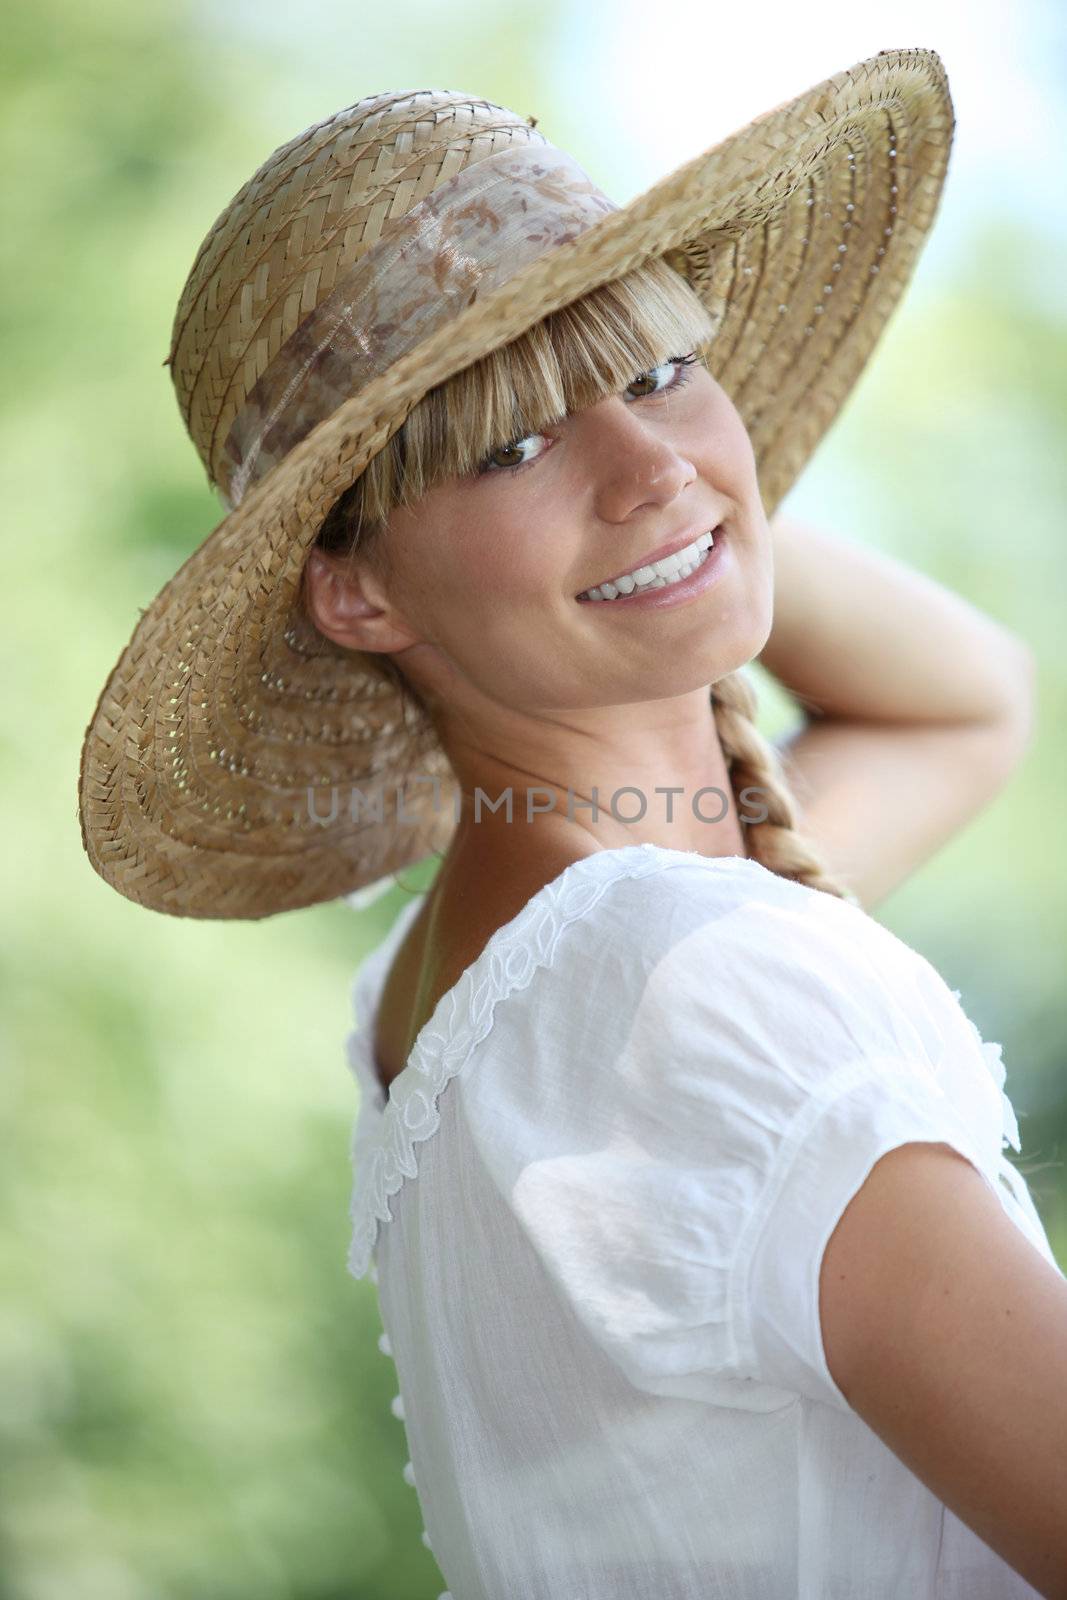 Woman smiling with straw hat